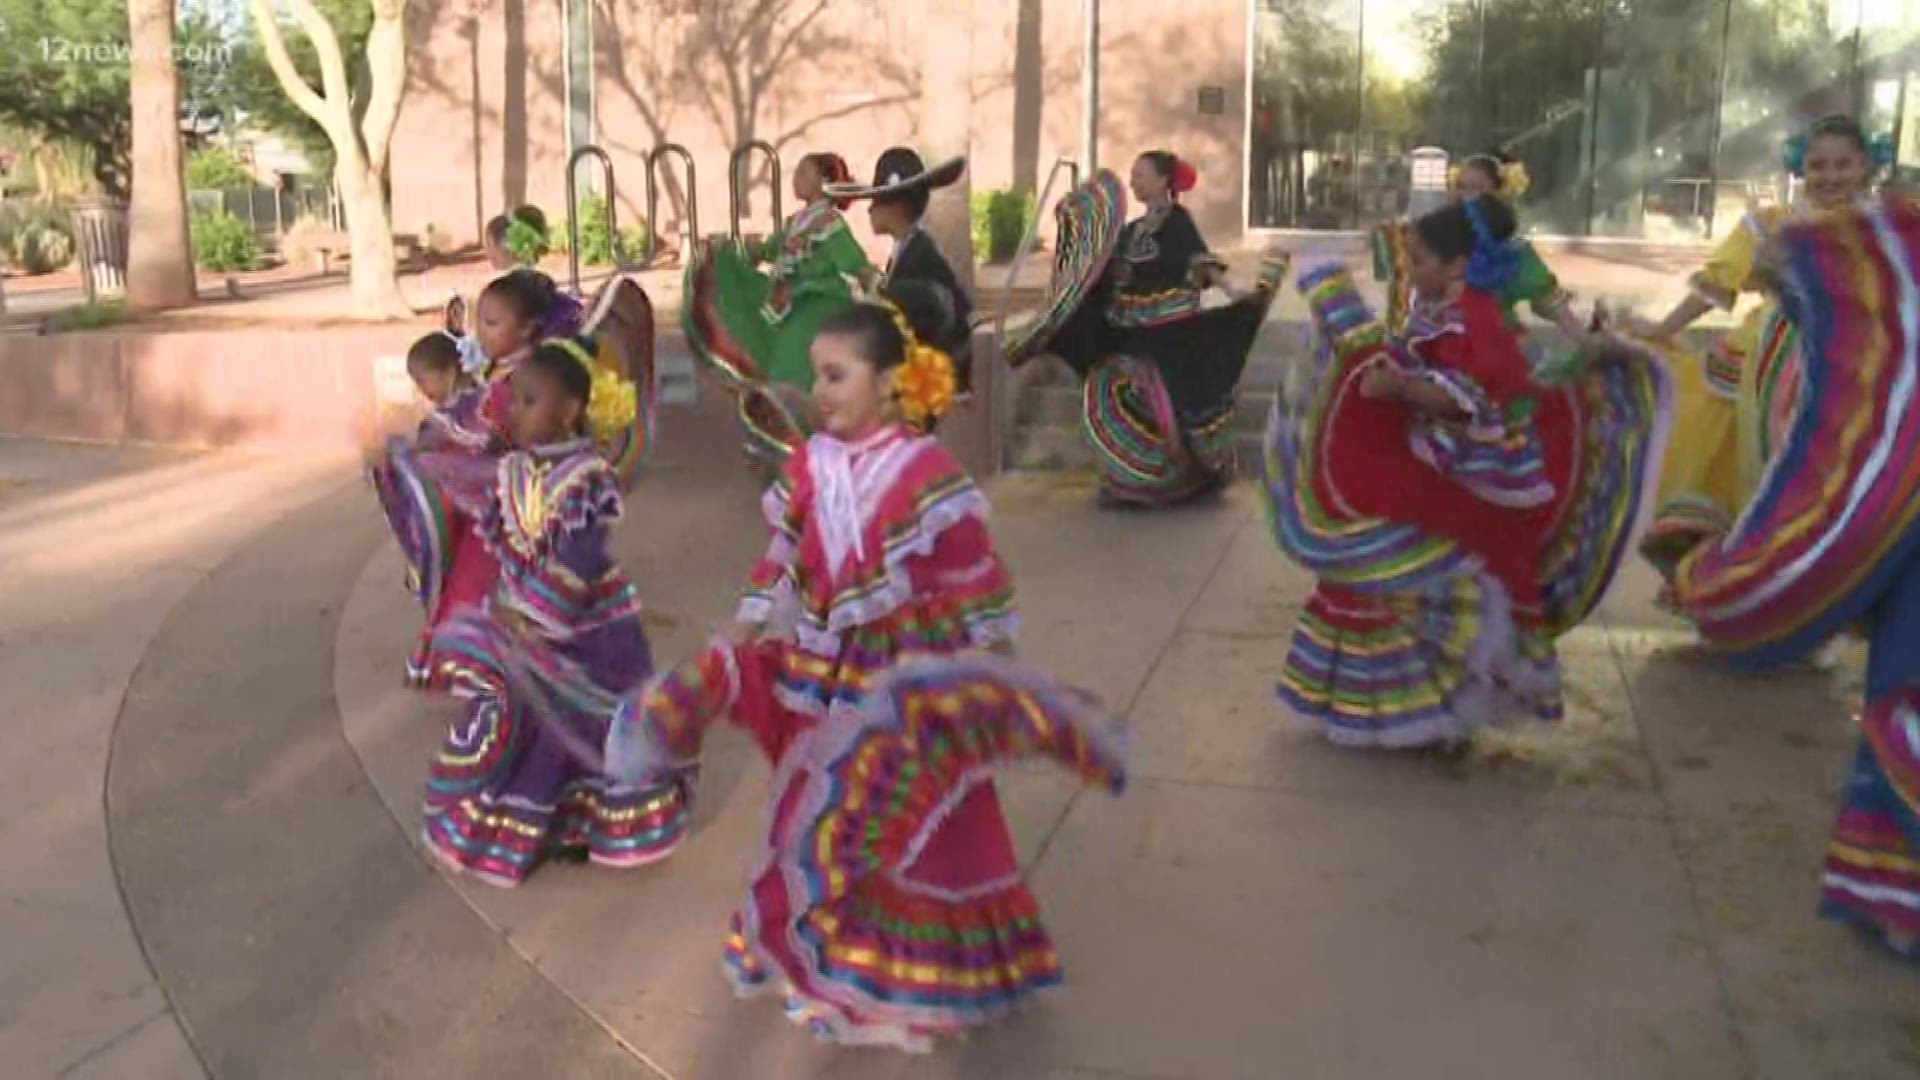 Here are some fun things to do this Cinco de Mayo